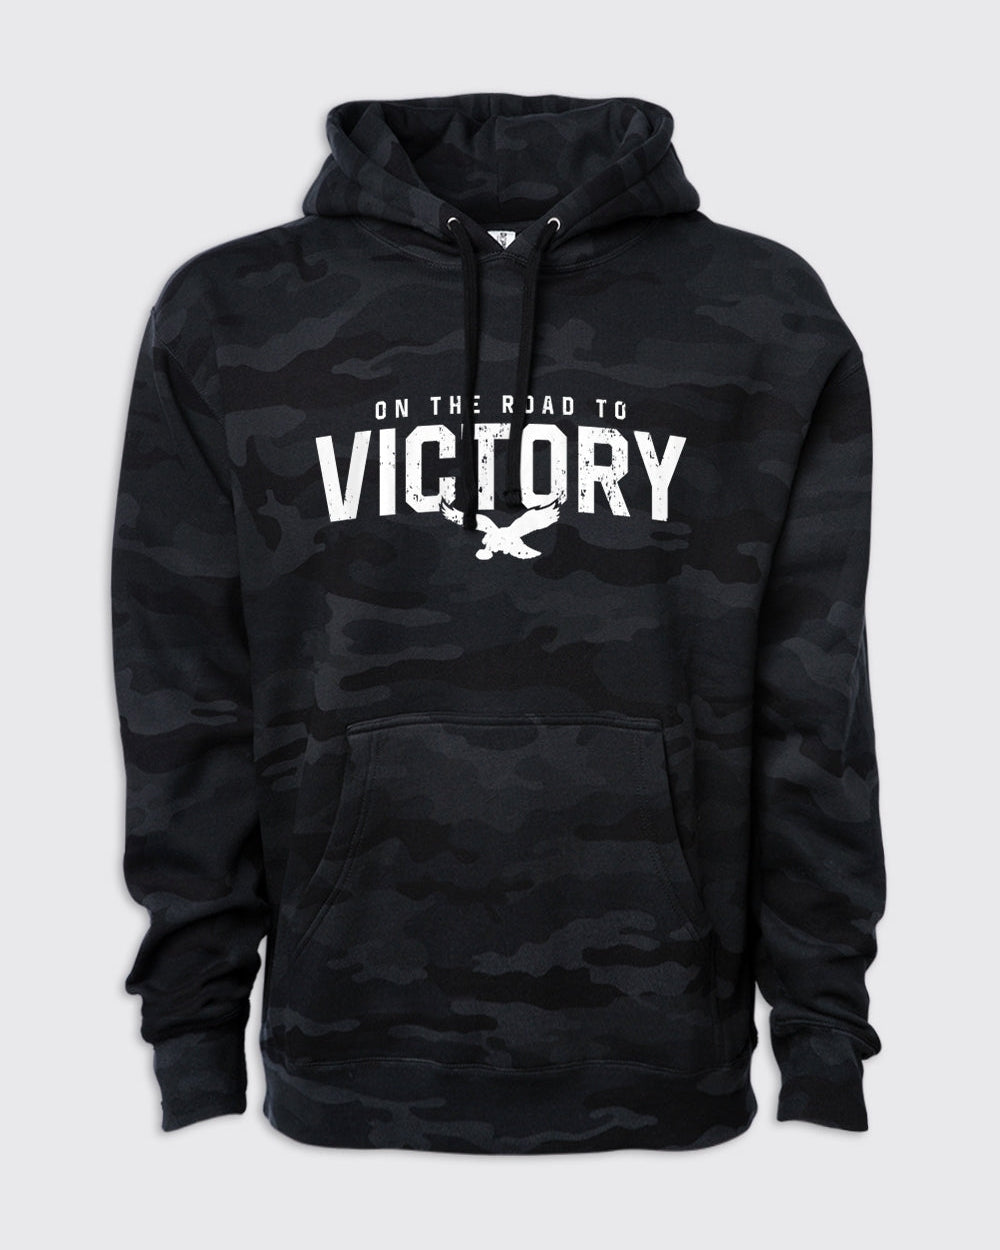 Philadelphia Eagles-Limited Edition On The Road To Victory Camo Hoodie-Black Camo-Philly Sports Shirts